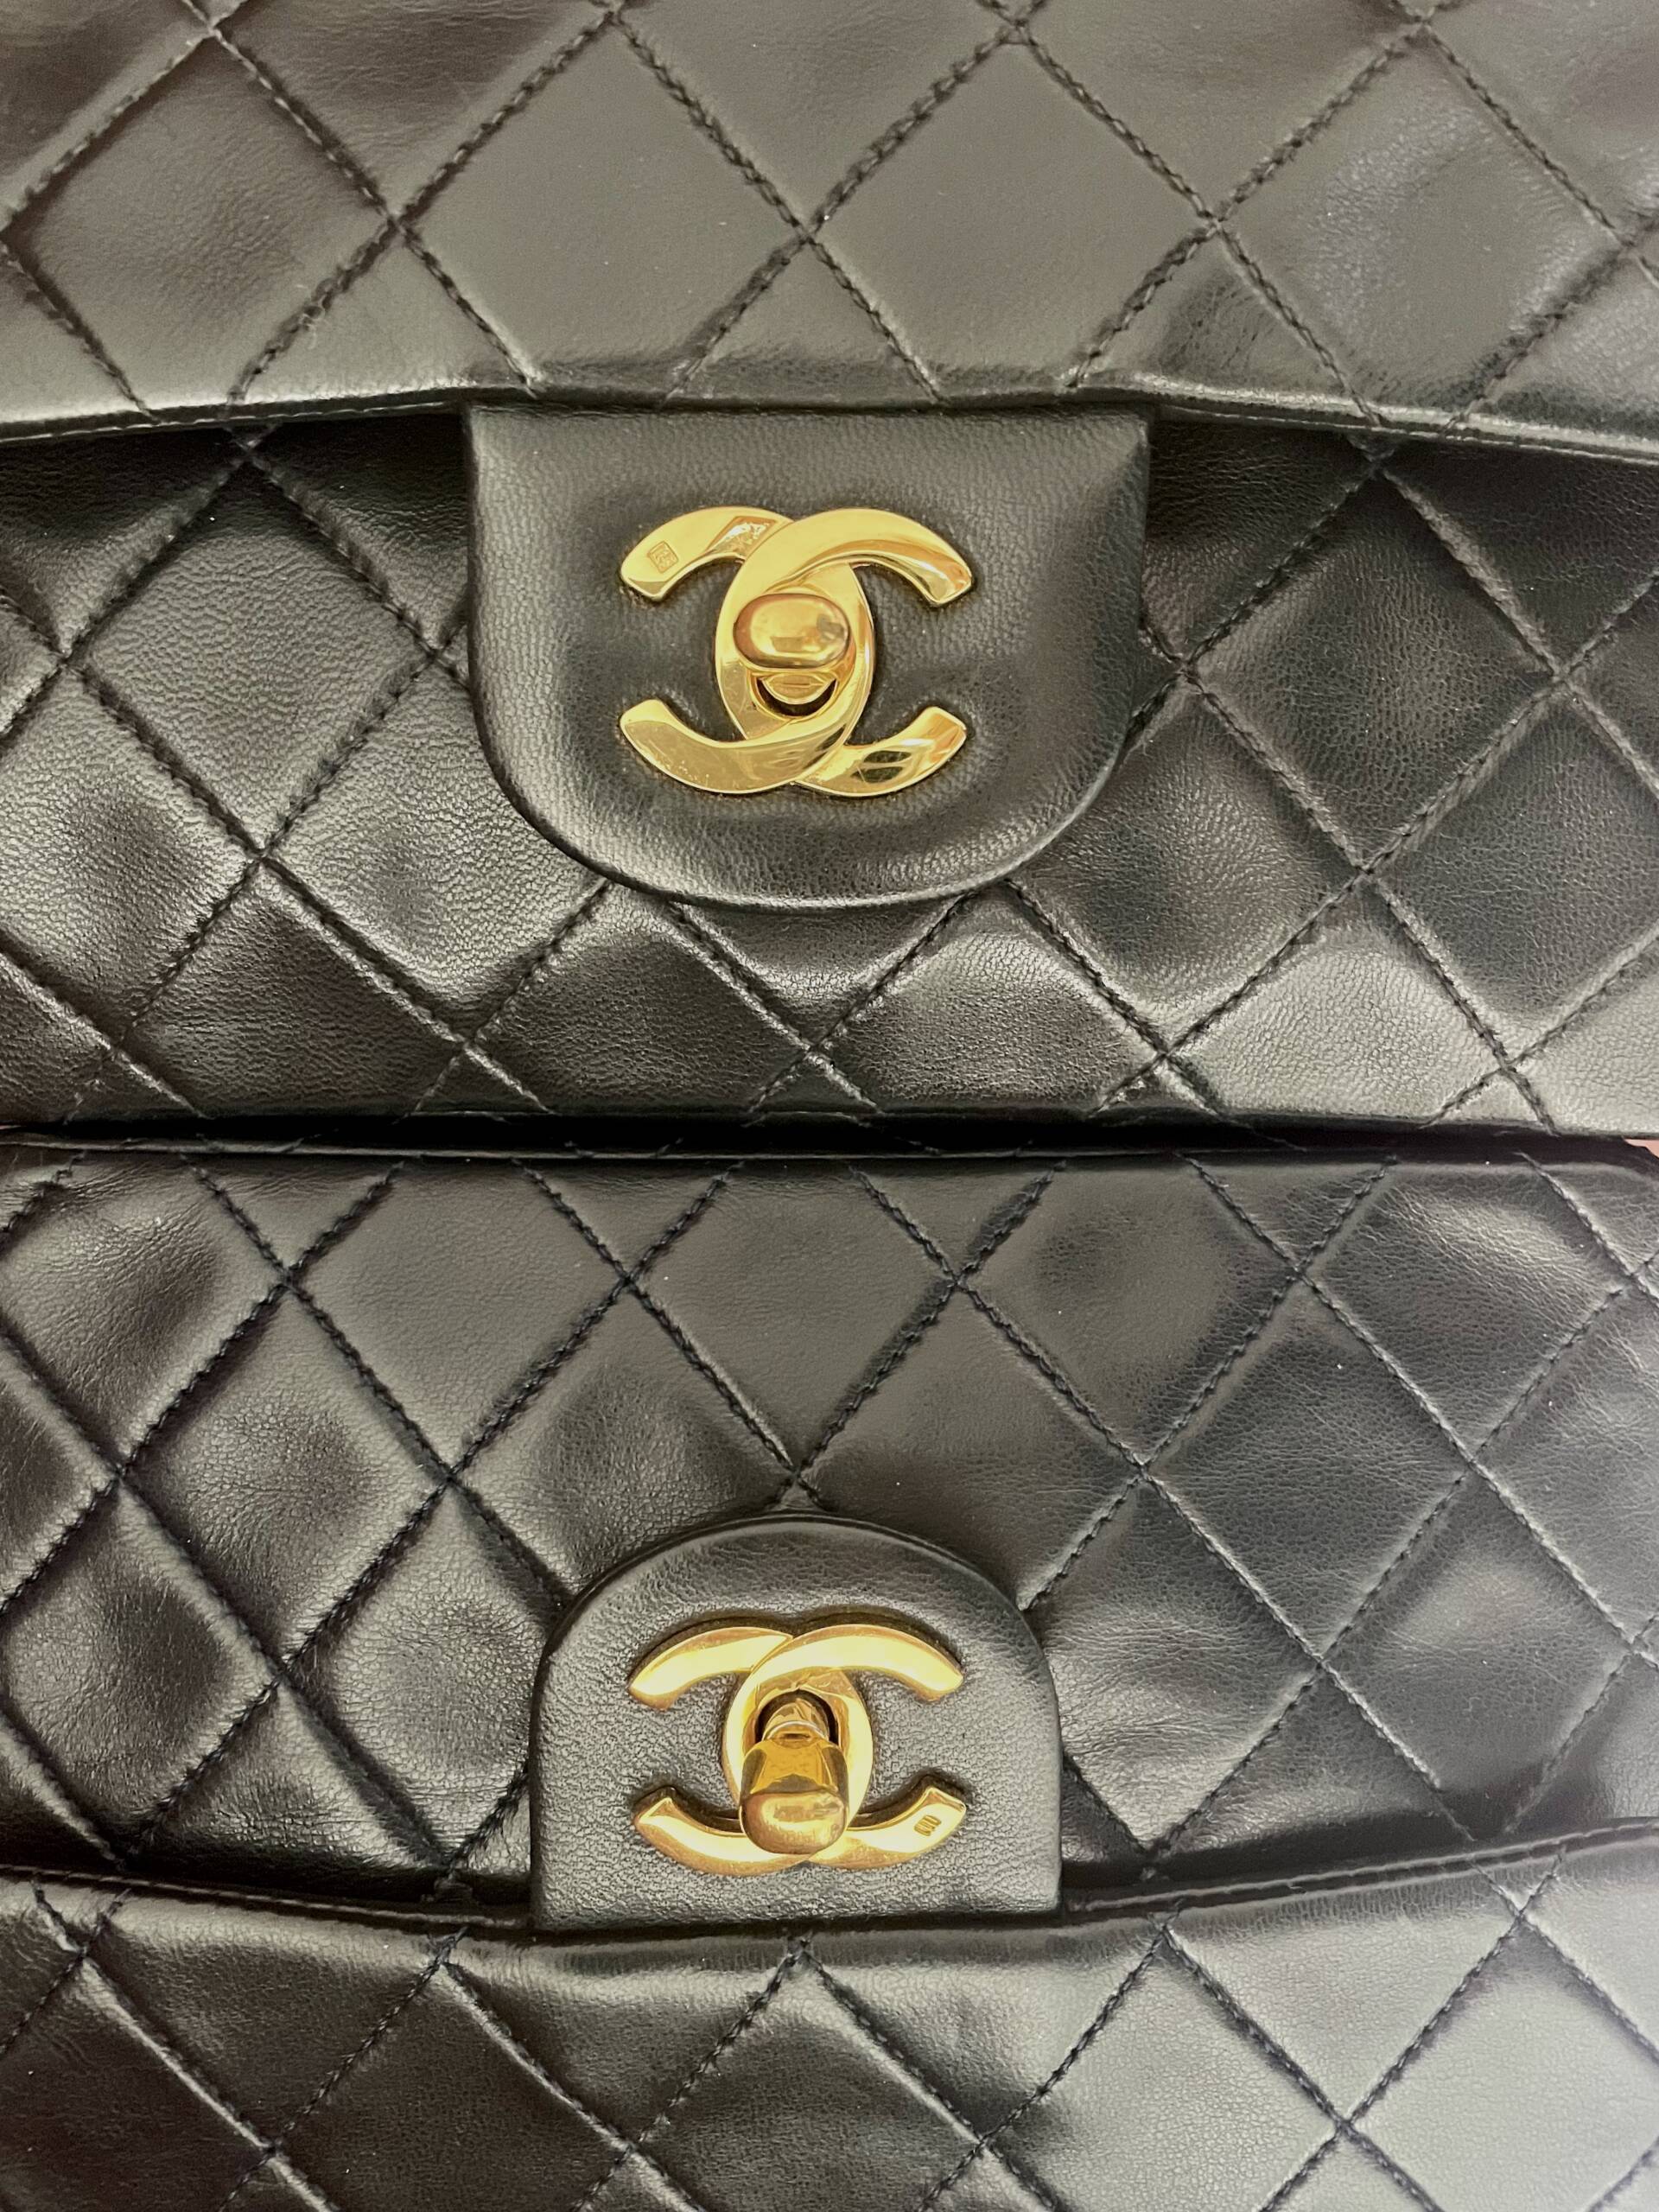 Chanel 101: Five of the Most Rare & Collectible Chanel Bags - The Vault